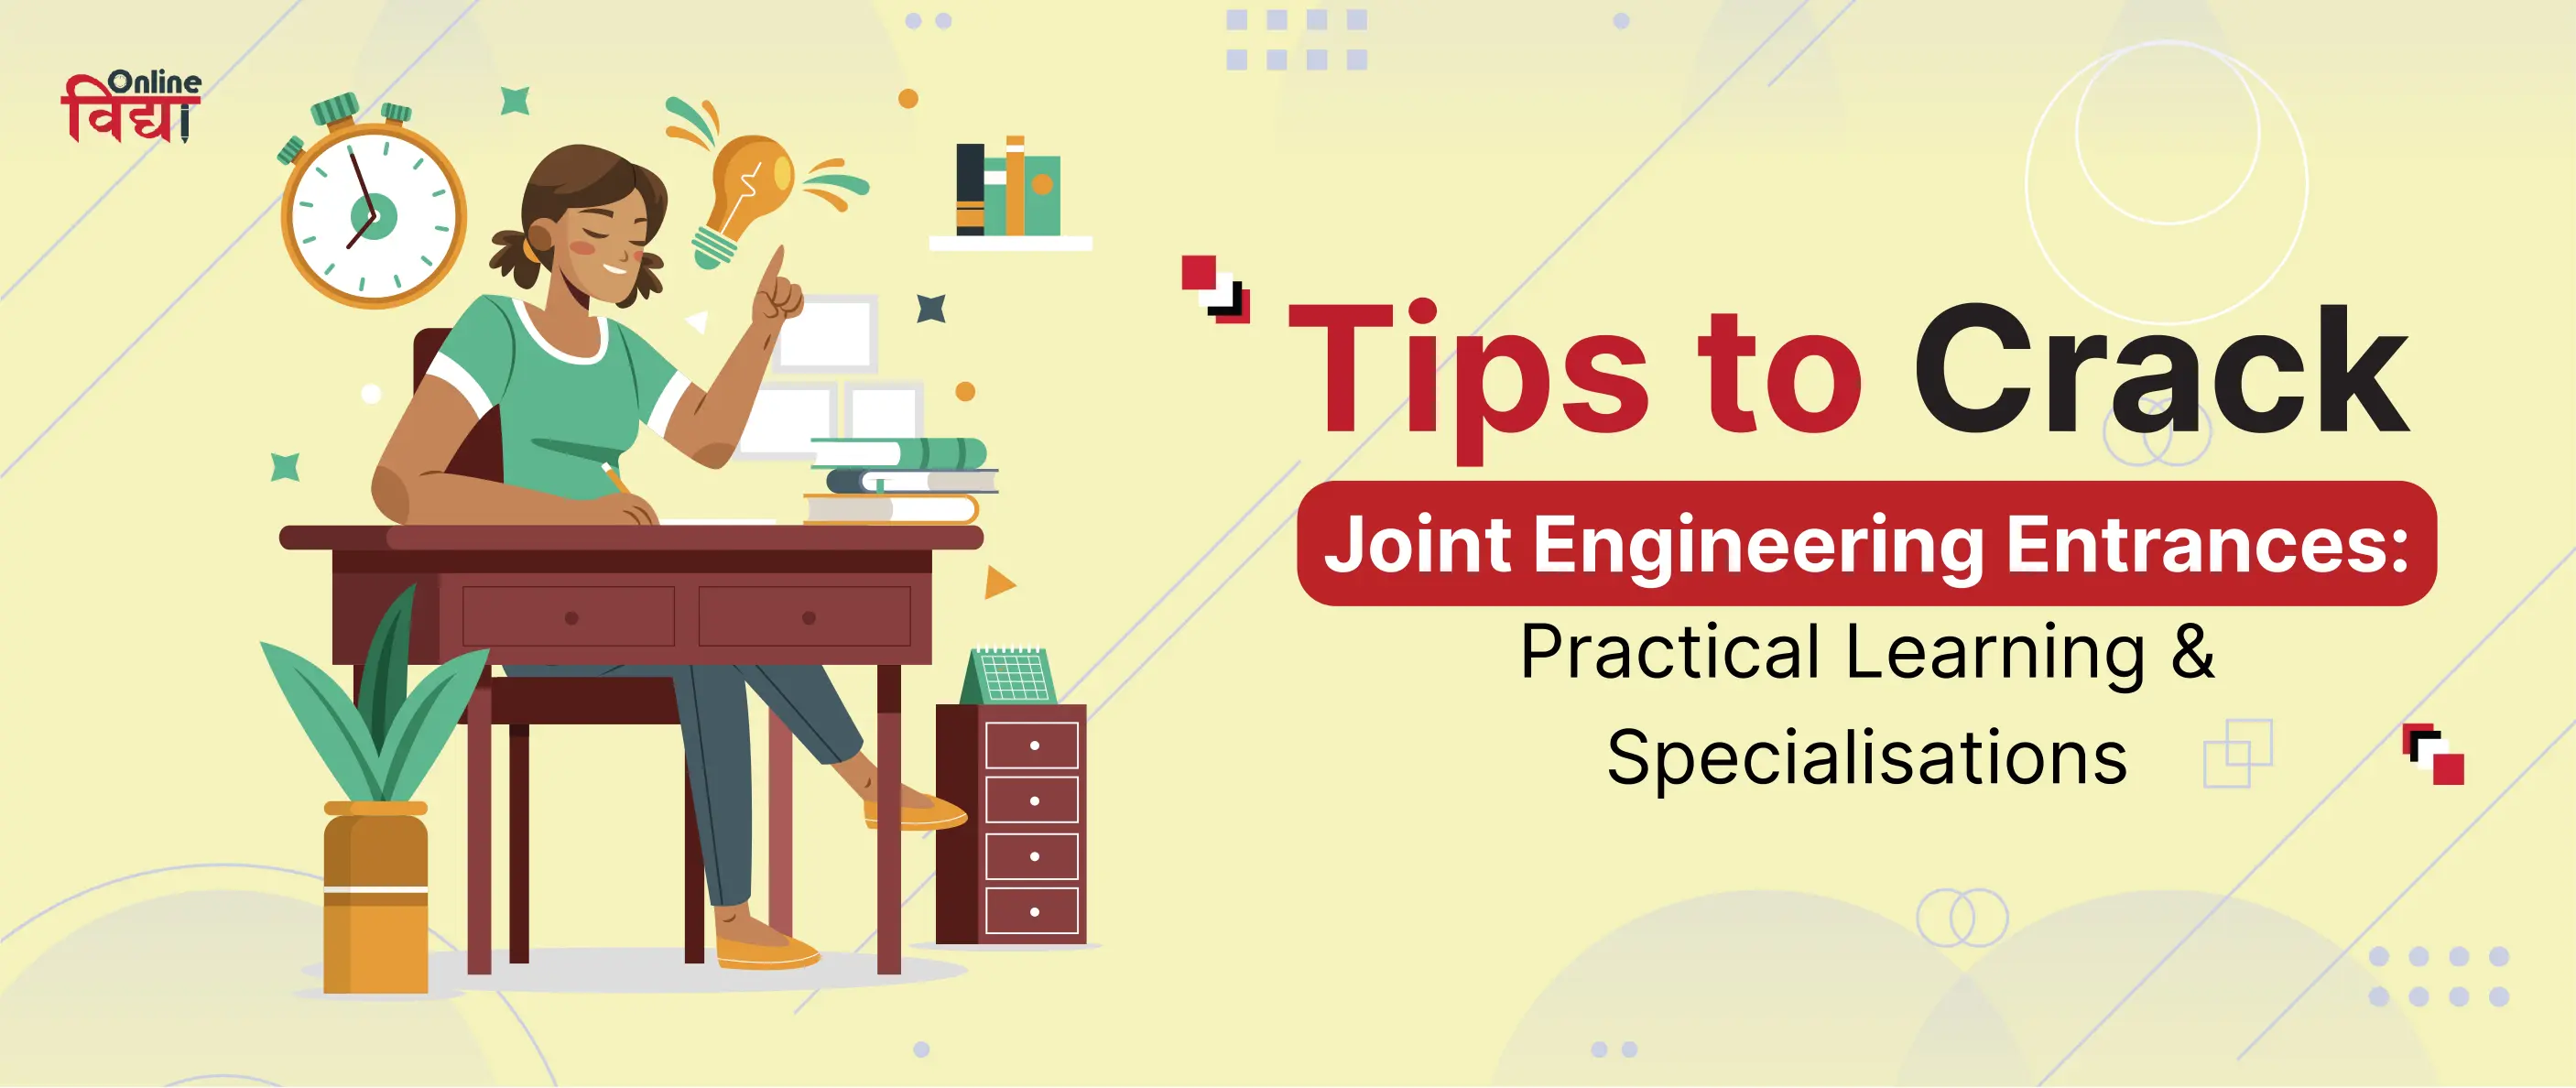 Tips to Crack Joint Engineering Entrances: Practice Learning and Specialisations